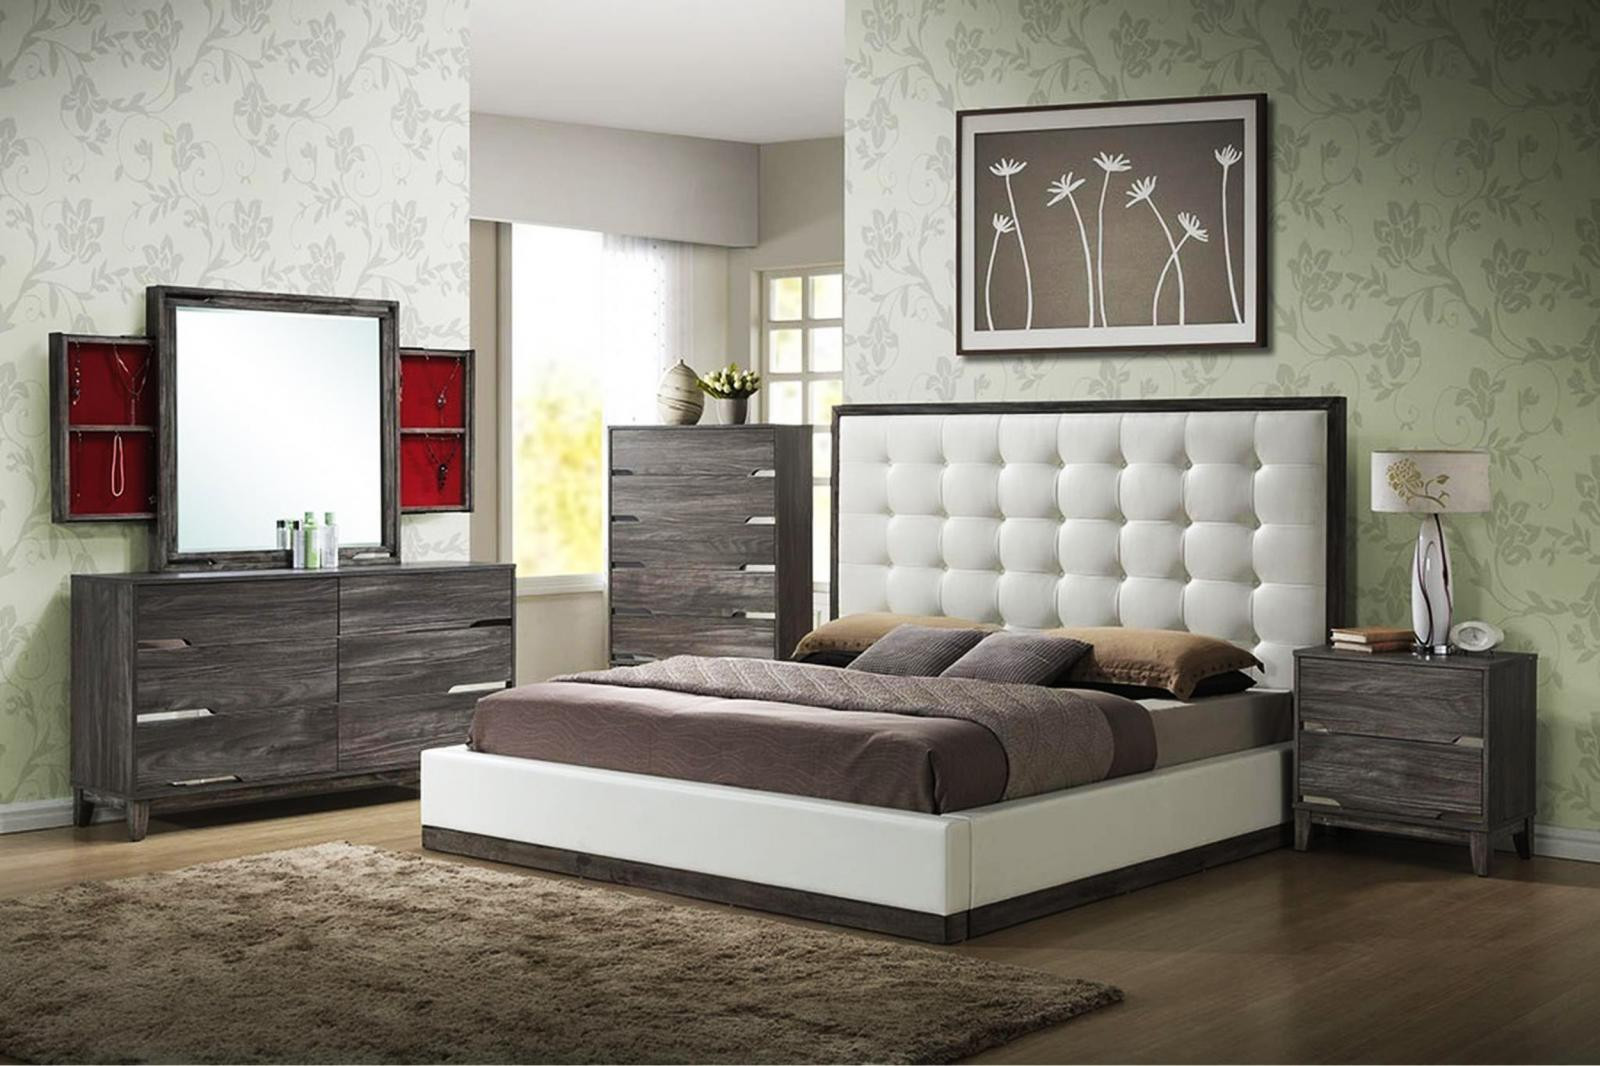 Rustic White Bedroom Furniture
 MYCO Furniture BR560 Q Brently Rustic Gray White Vinyl